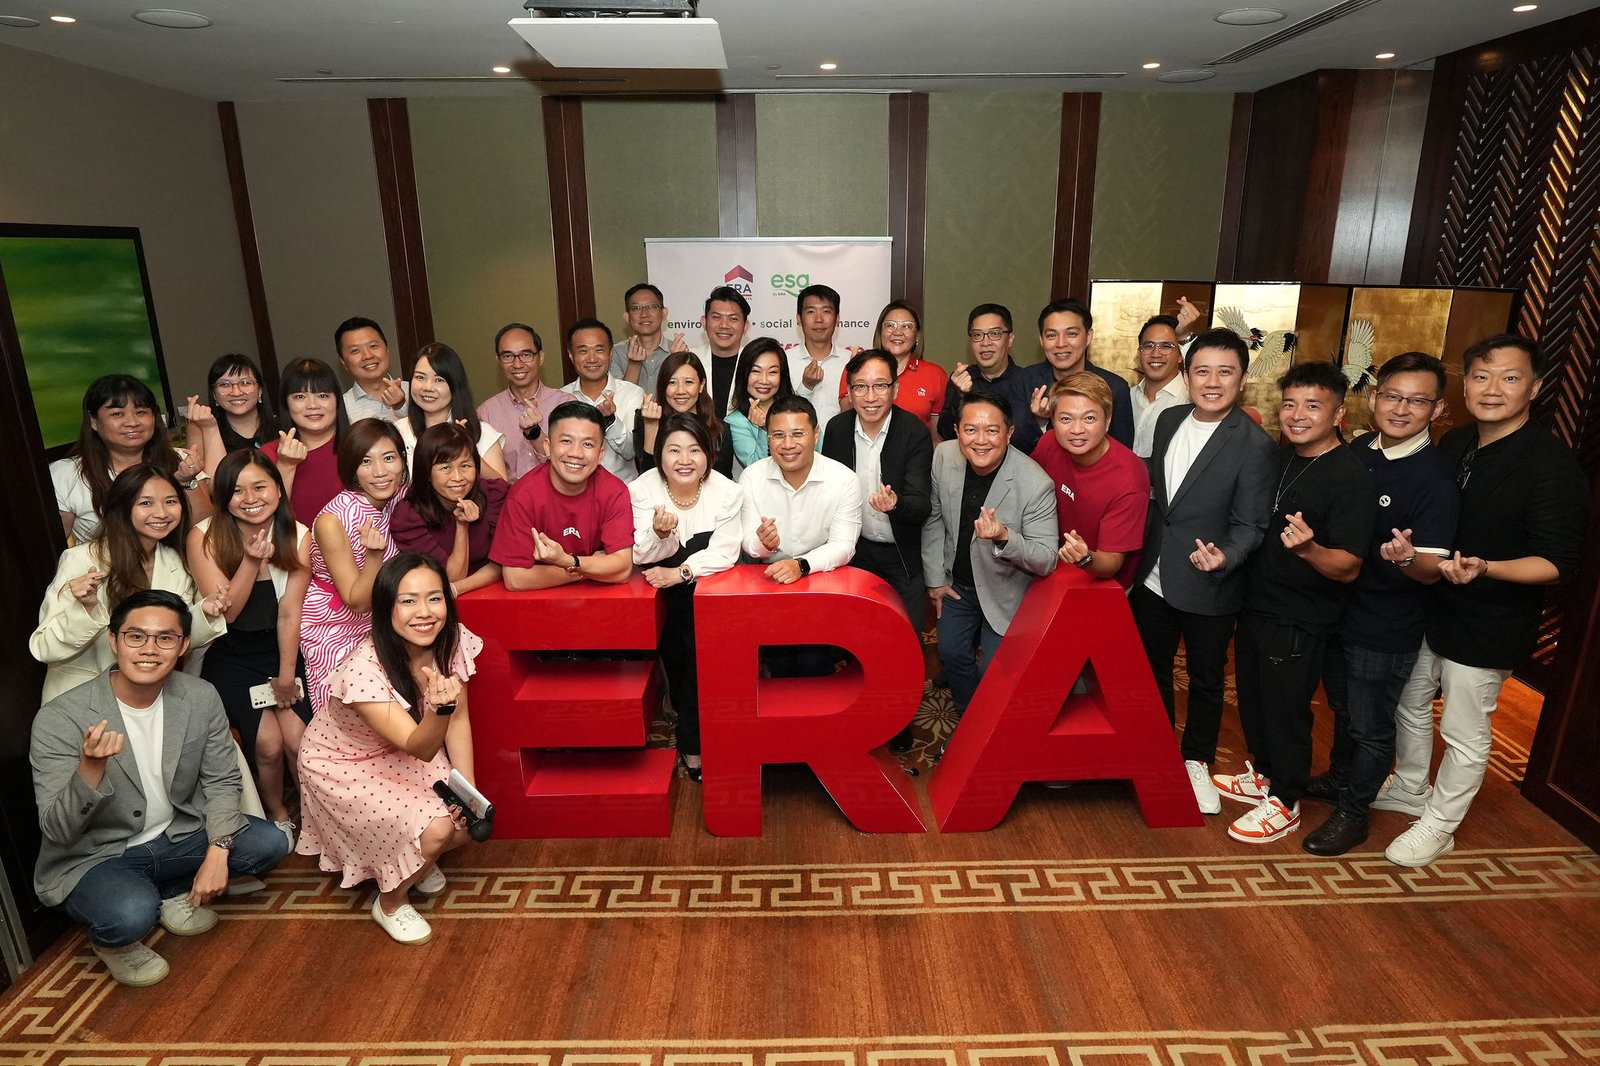 ERA Singapore Partners ComLink @ Jurong West to “Gift-A-Family”